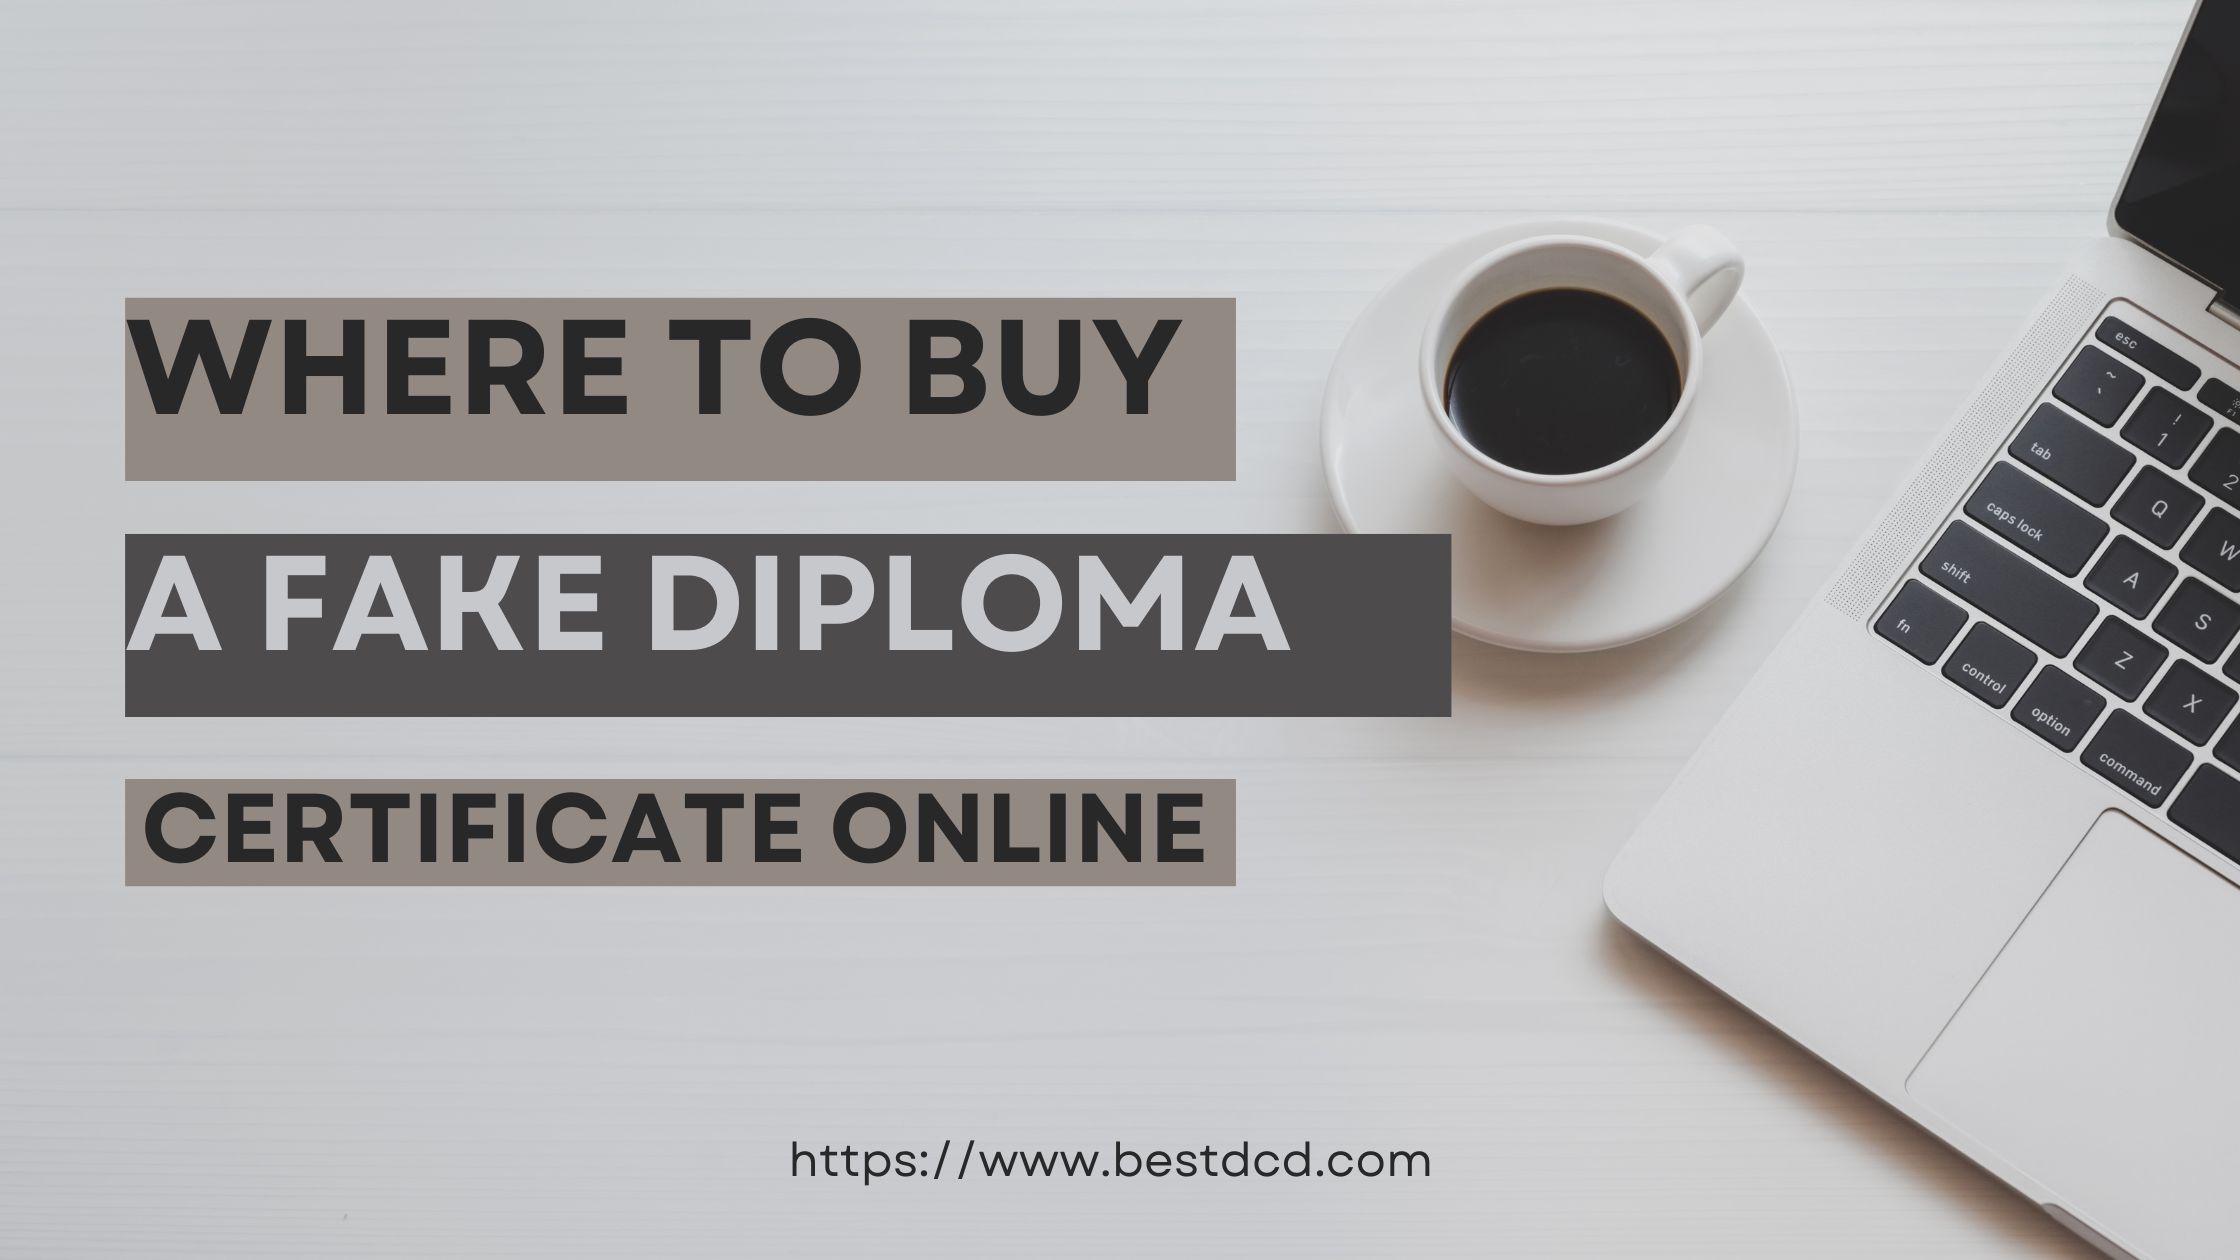 Where to Buy a Fake Diploma Certificate Online